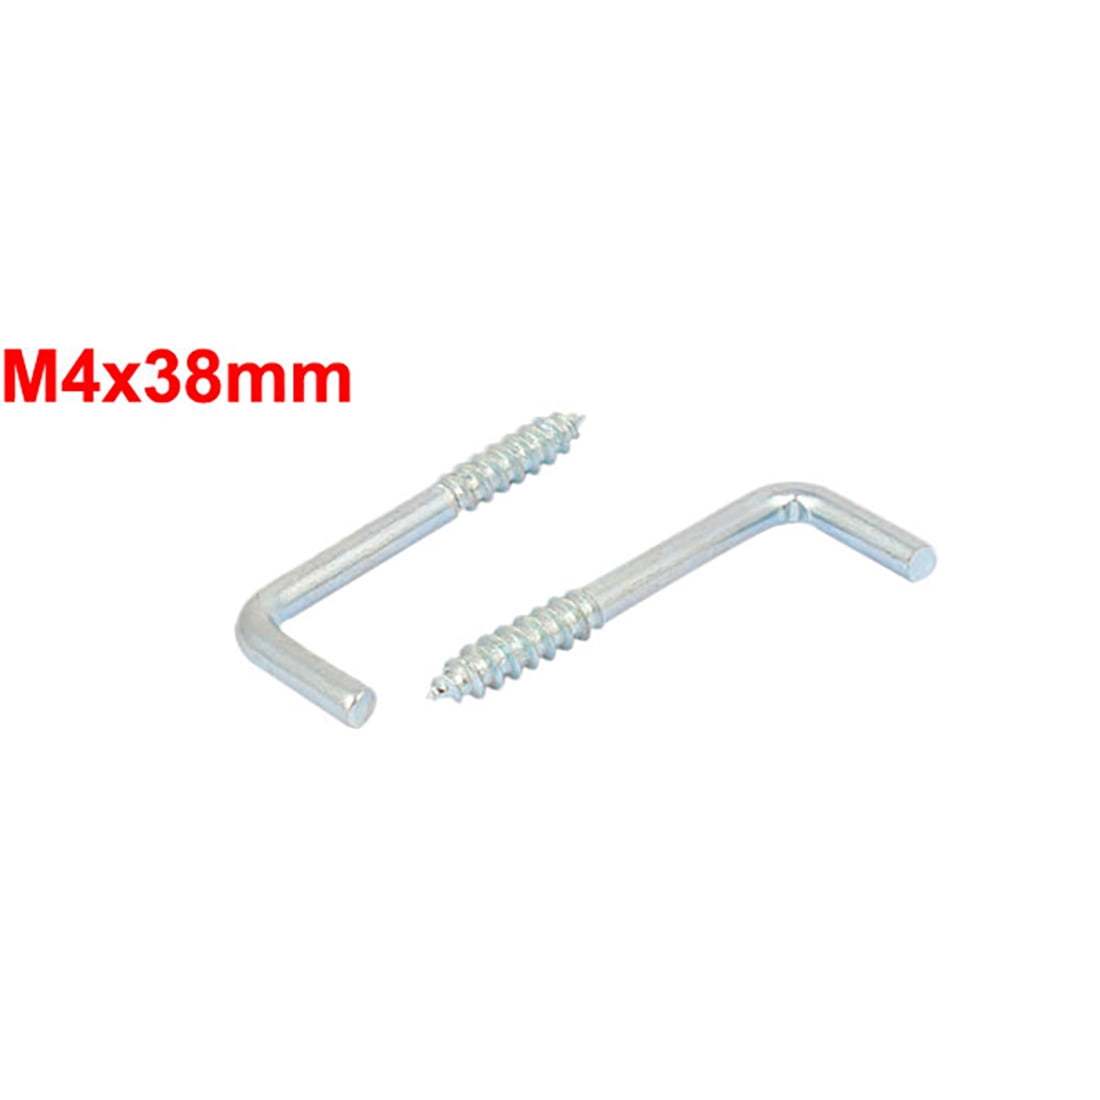 Uxcell Home Wall L Shaped Self Tapping Metal Screw Hook Picture Hanger  M2.5x25mm 50pcs 